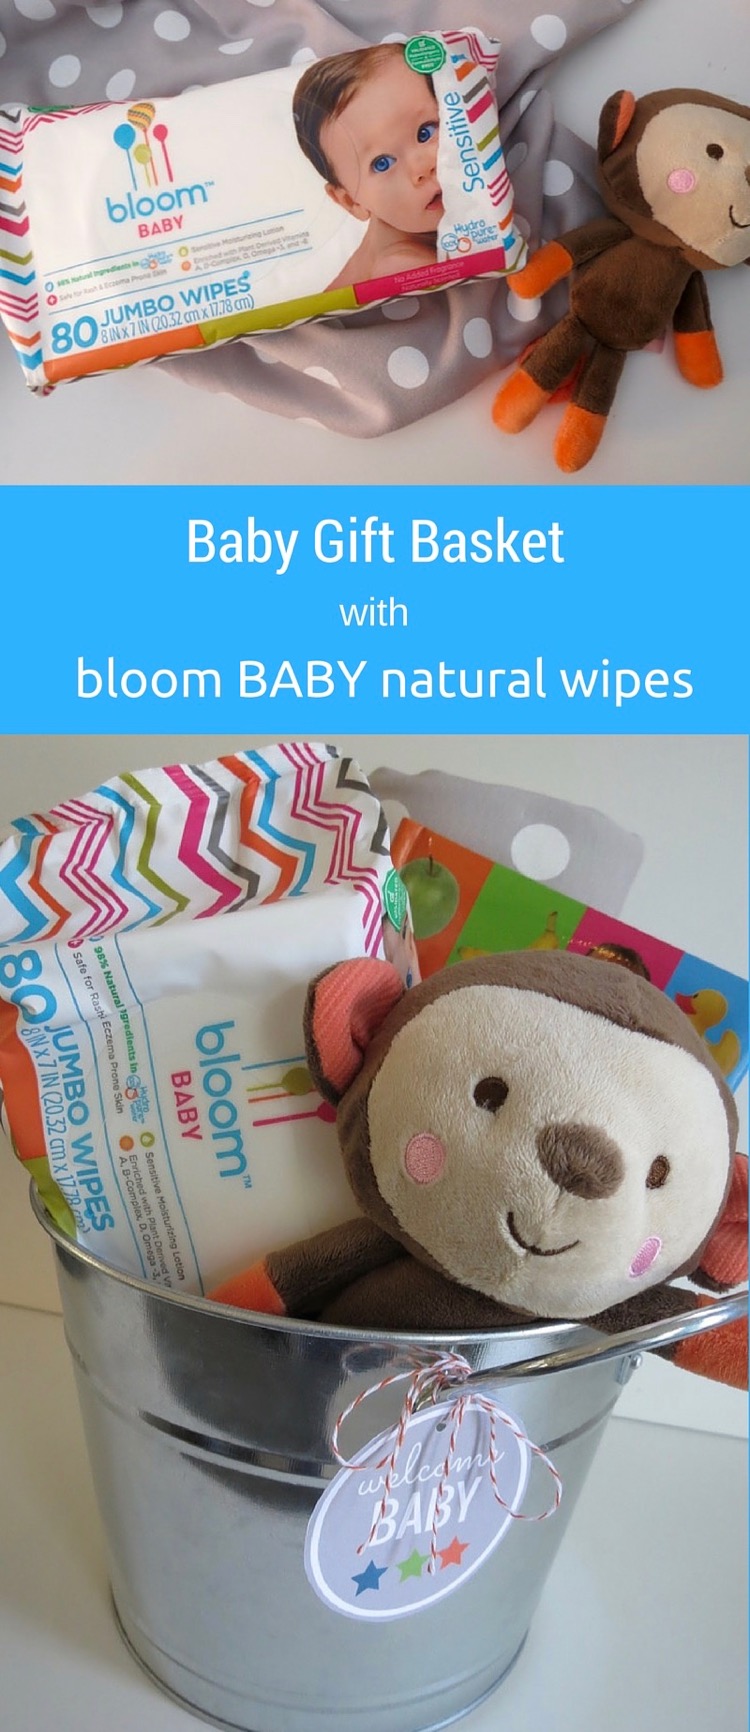 Baby Gift Basket featuring bloom BABY natural wipes at Target